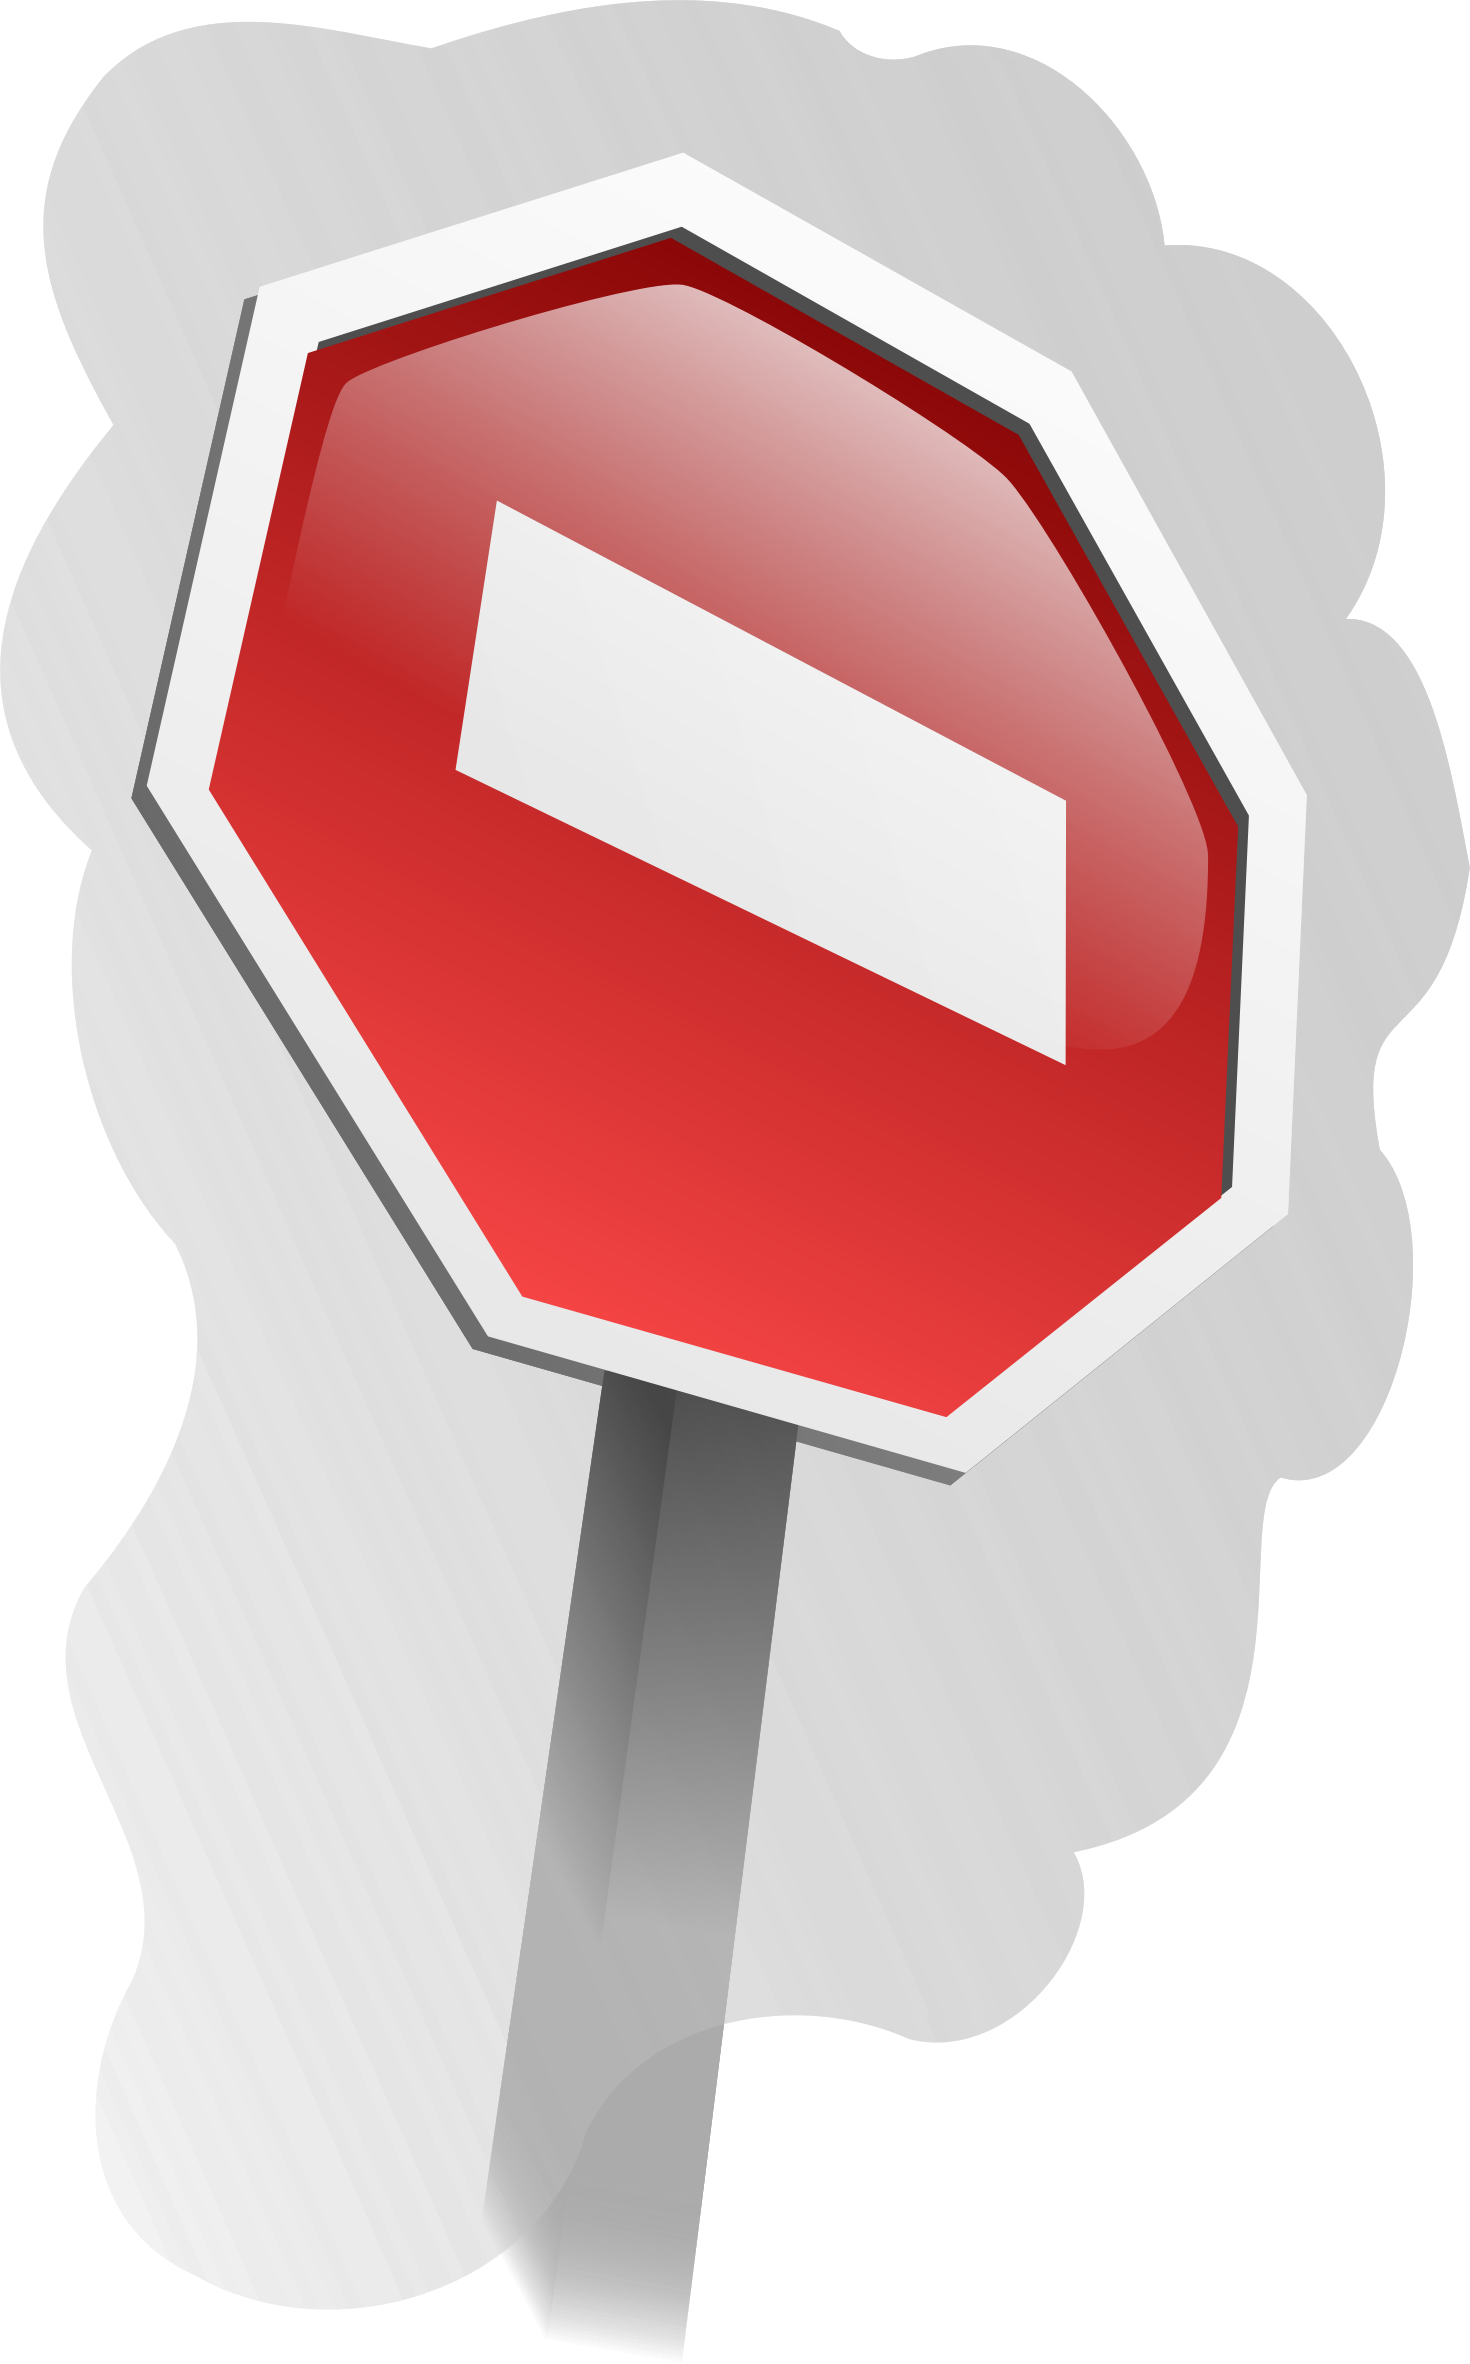 Blank Stop Sign Clip Art Clipart Red Stop Sign Shape Transparent Images